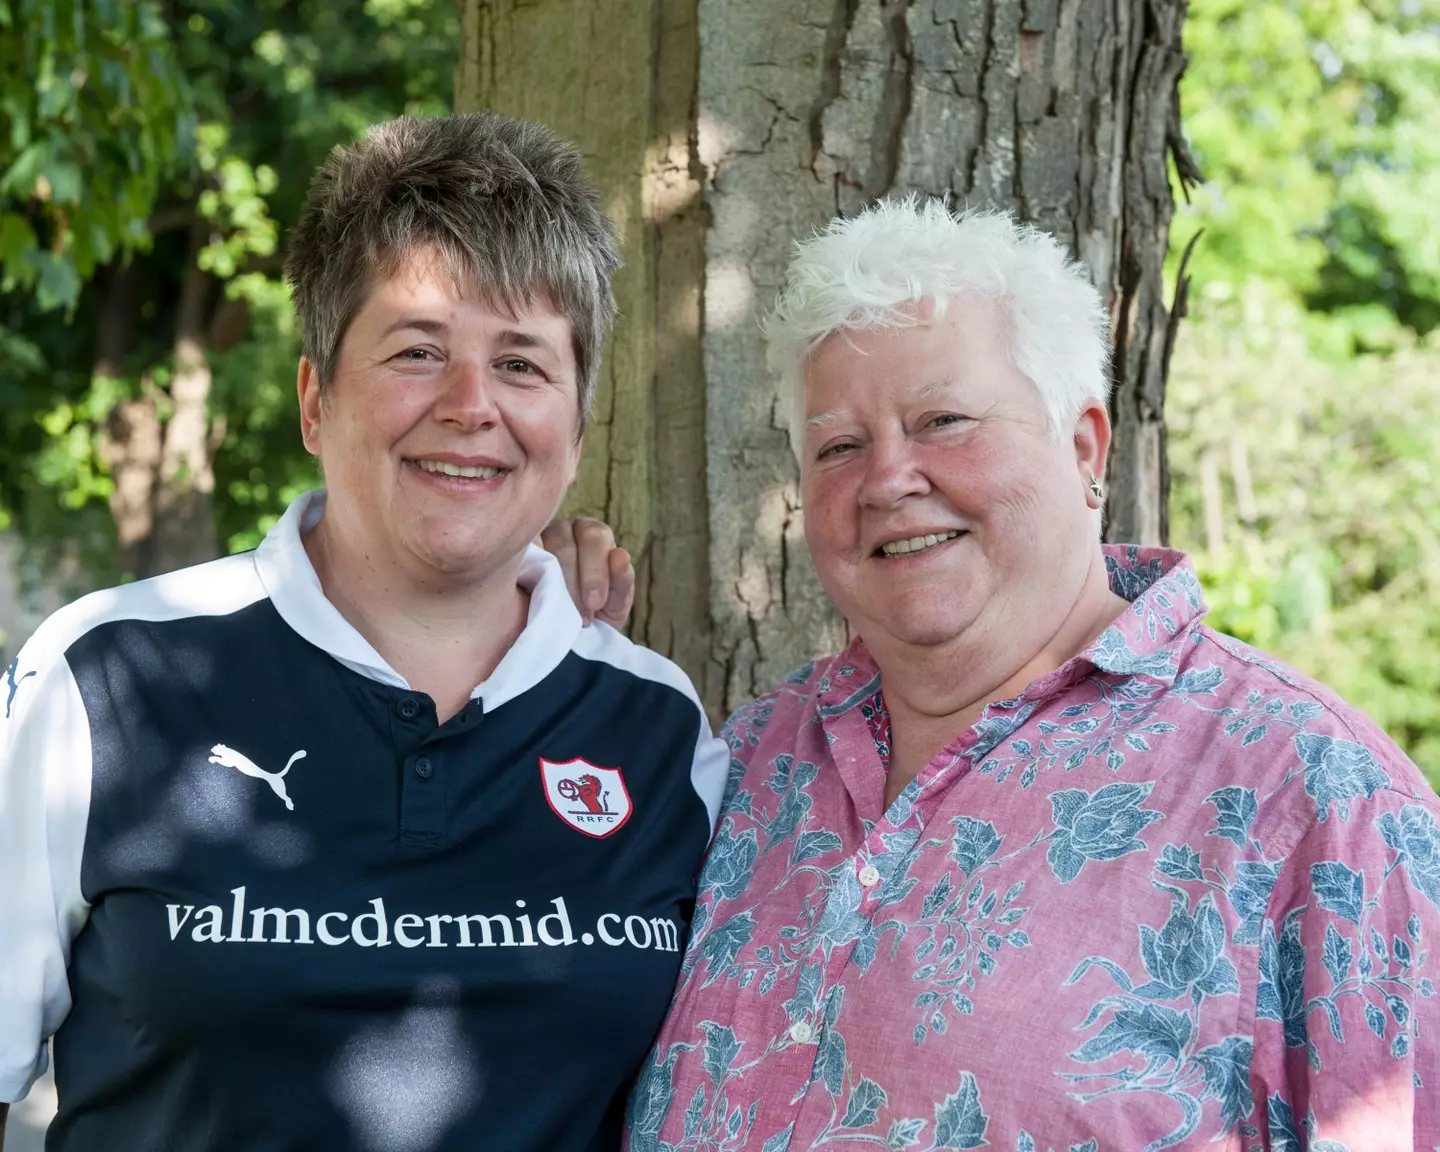 McDermid, right, with her partner wearing the Raith Rovers shirt adorning the writer's sponsorship. Image: PA Images